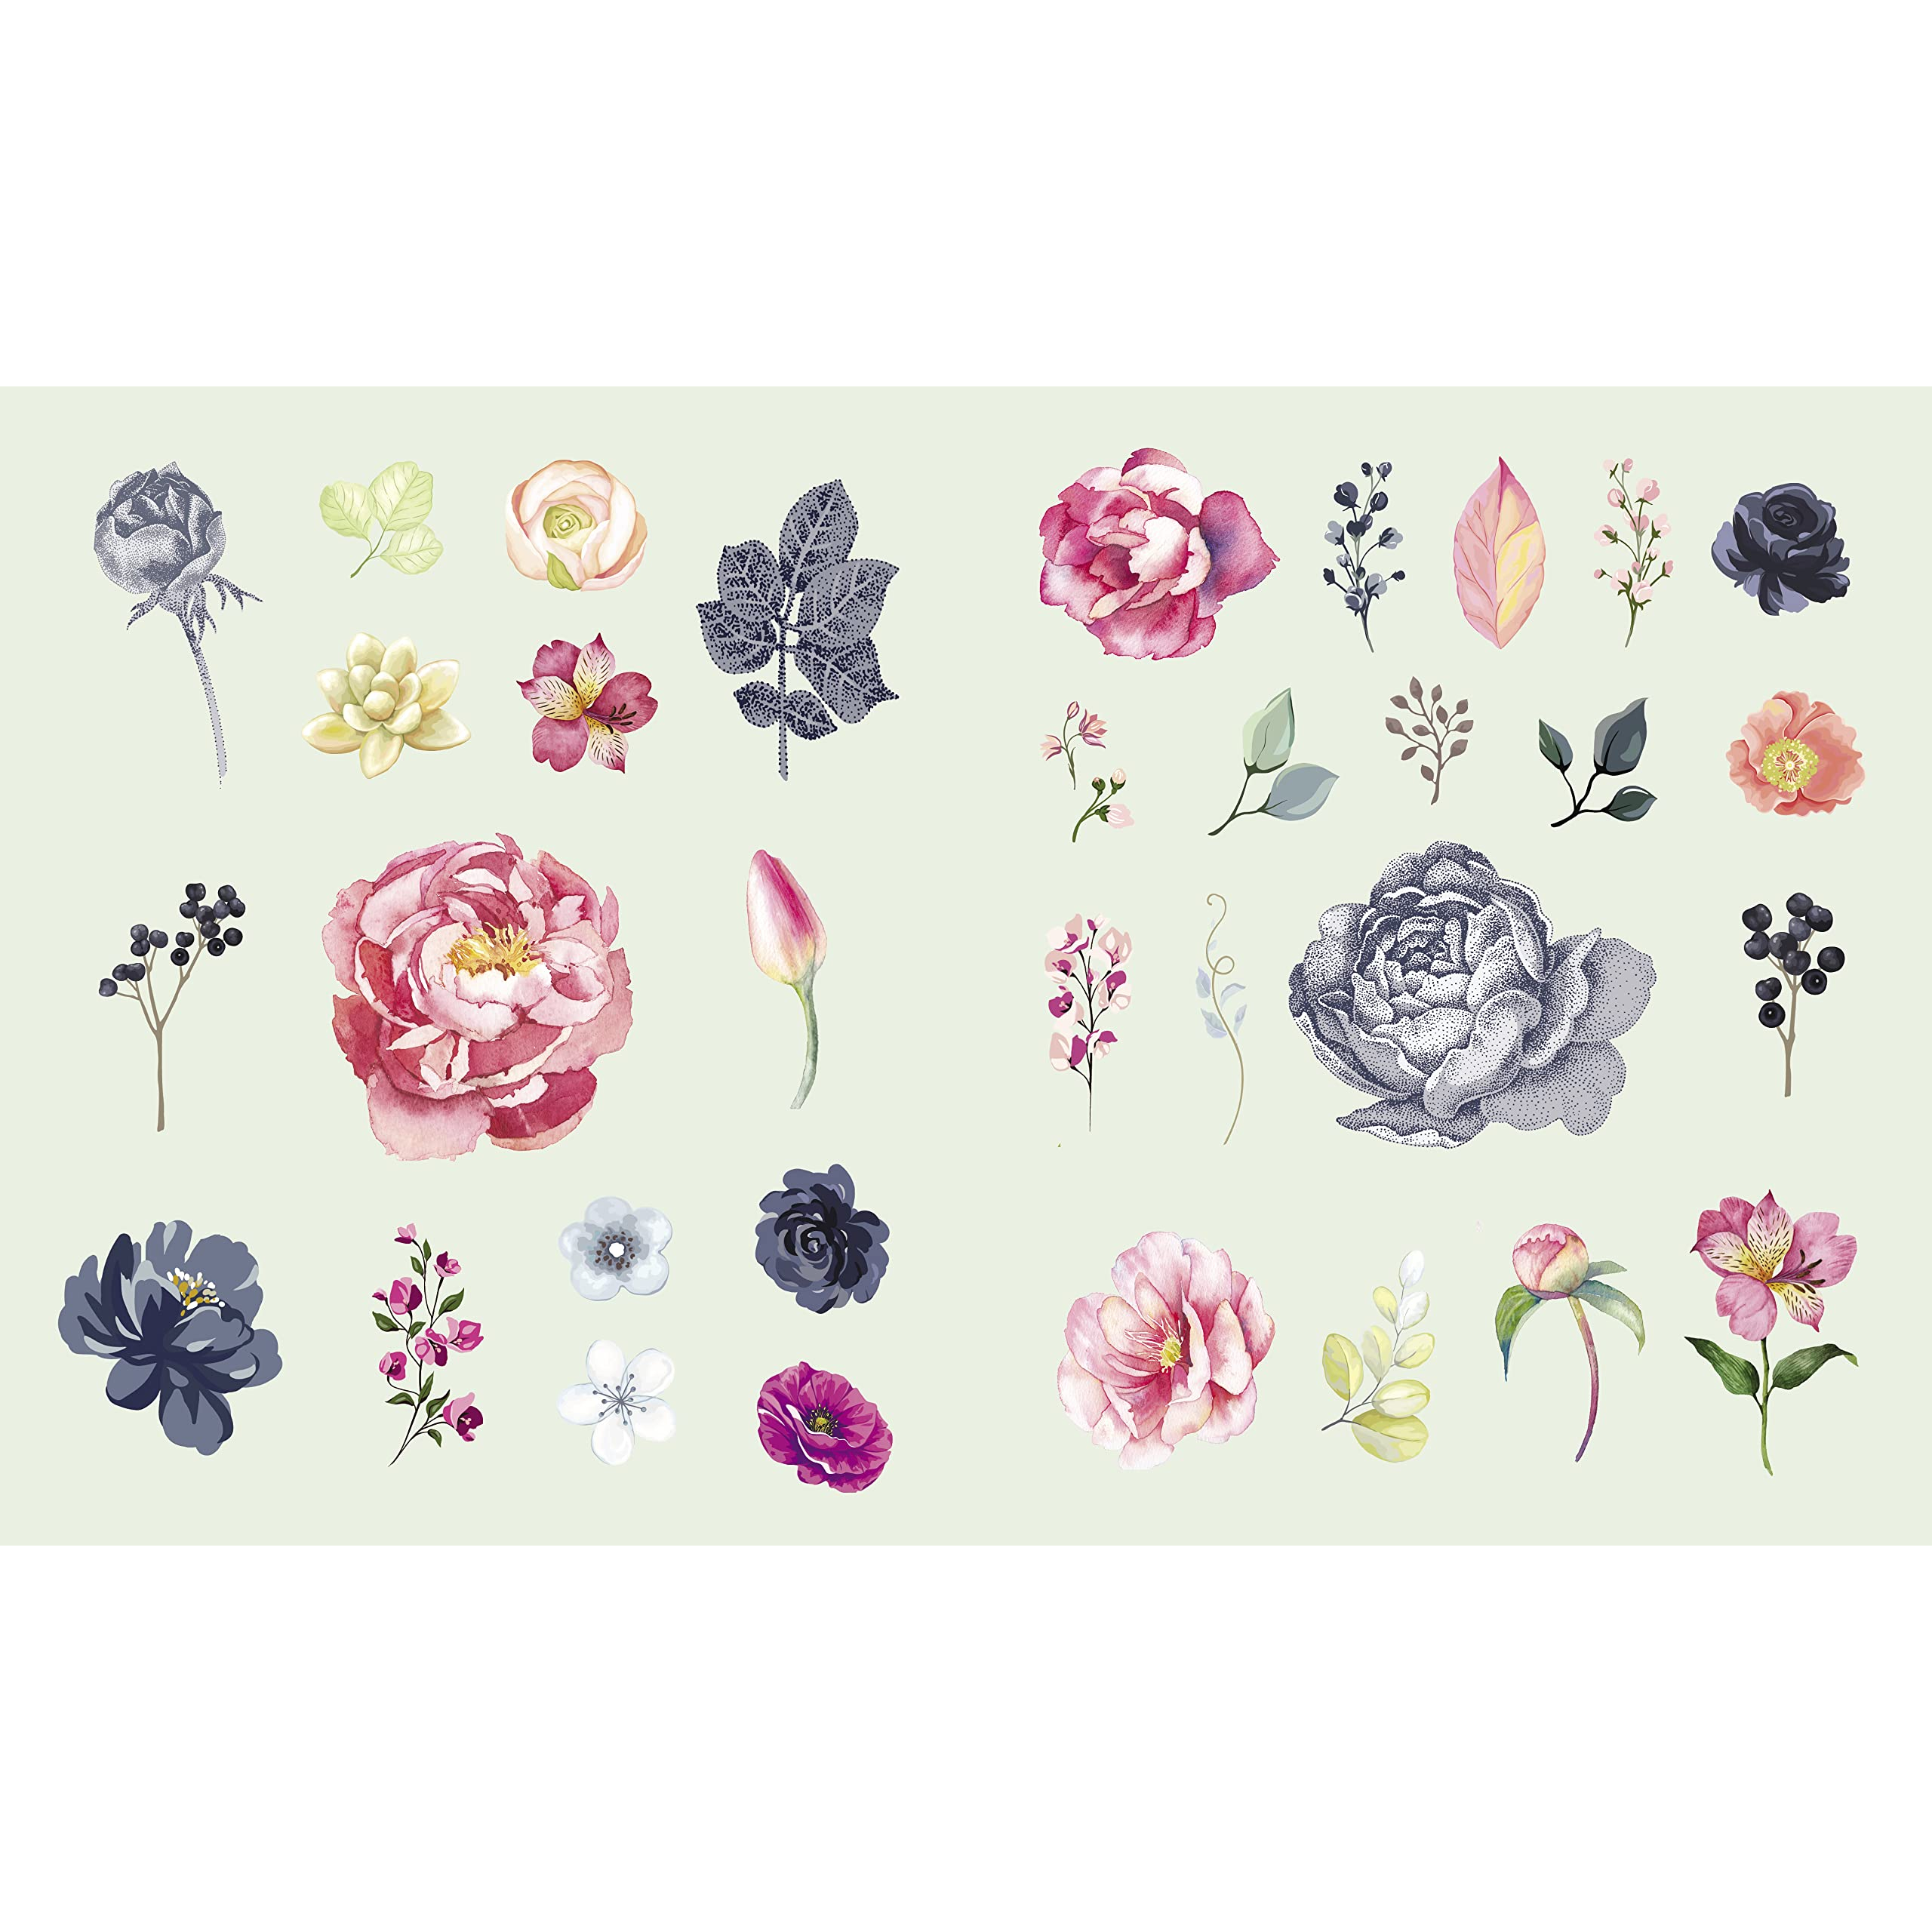 sticker-studio-flora-a-sticker-gallery-of-beautiful-blooms-hardcover-beauty-of-flowers-and-foliage-with-850-stickers